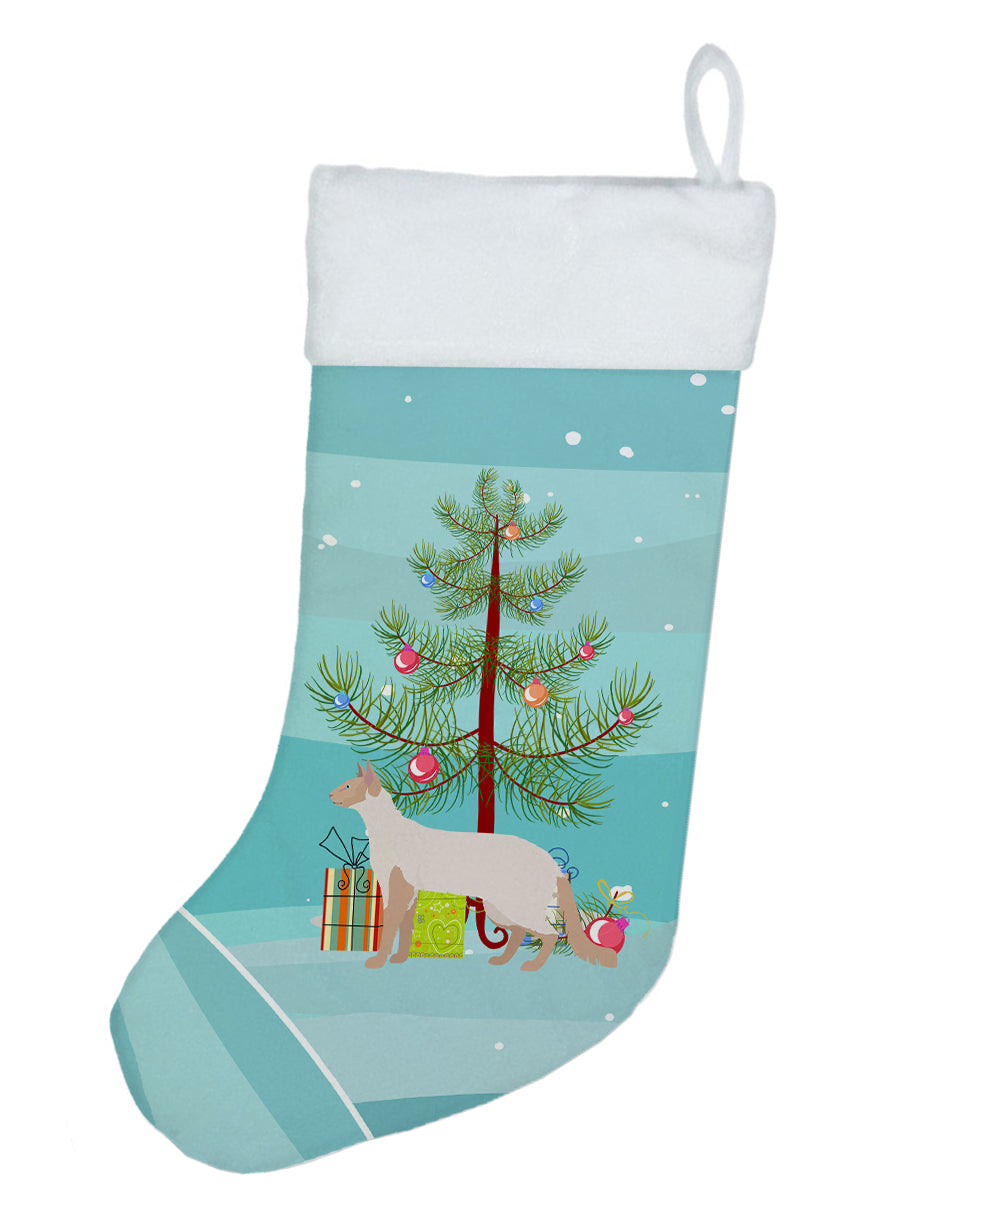 Colorpoint Longhair #2 Cat Merry Christmas Christmas Stocking